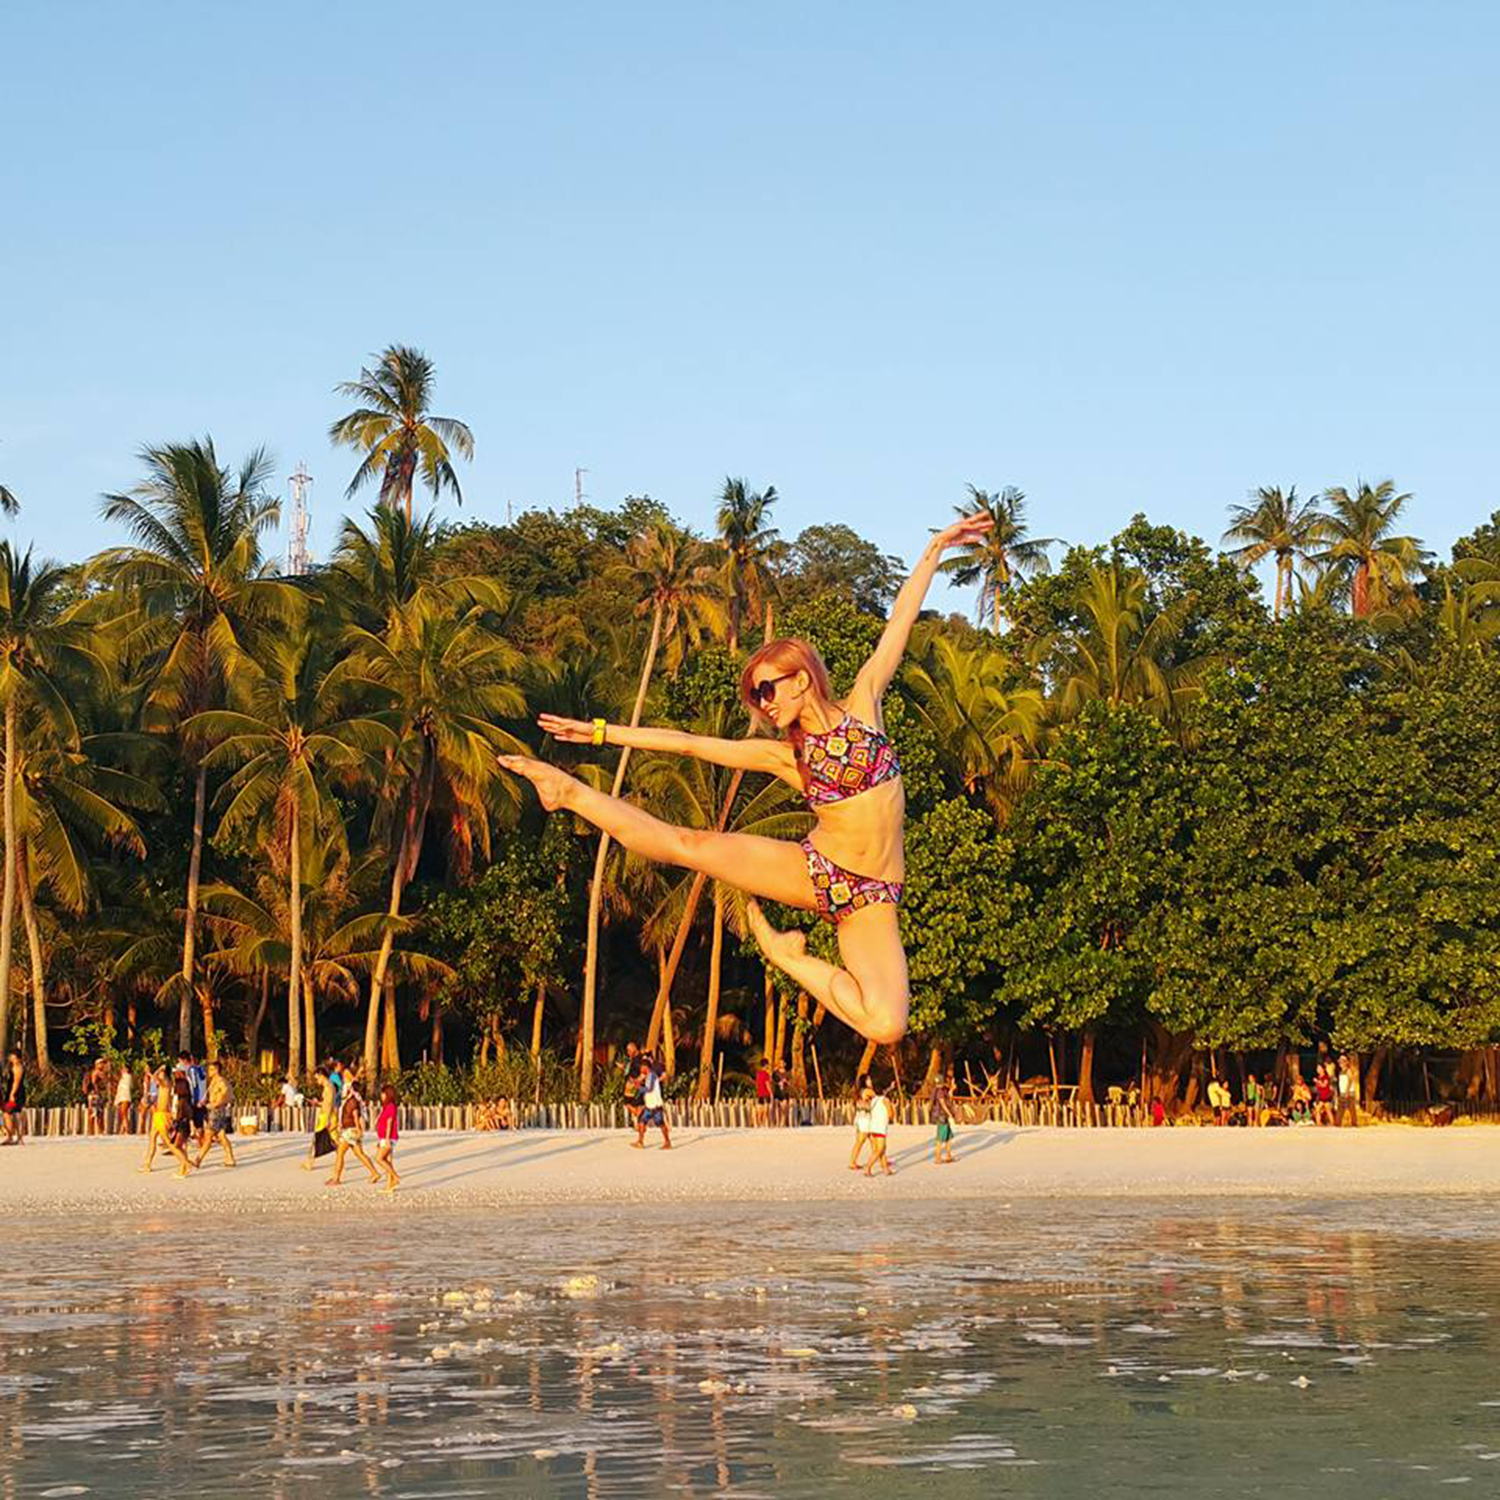 While on summer vacation in Boracay, Joan executes a fantastic jump/ dance shot.